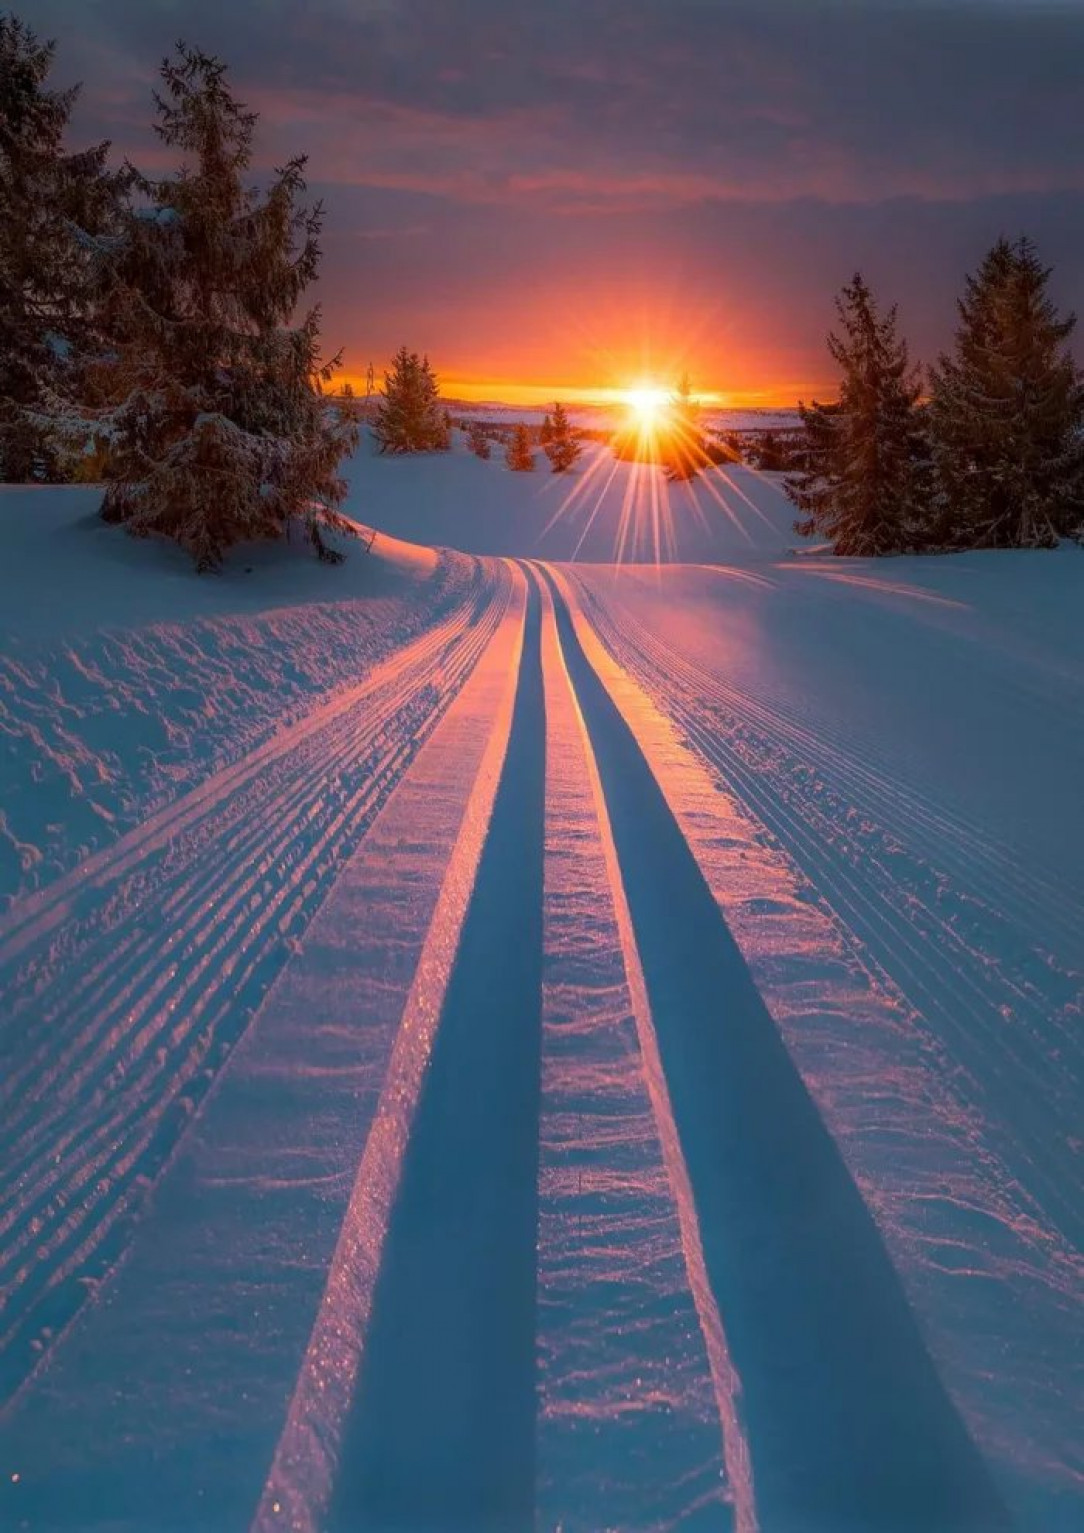 Snow tracks in the sunset